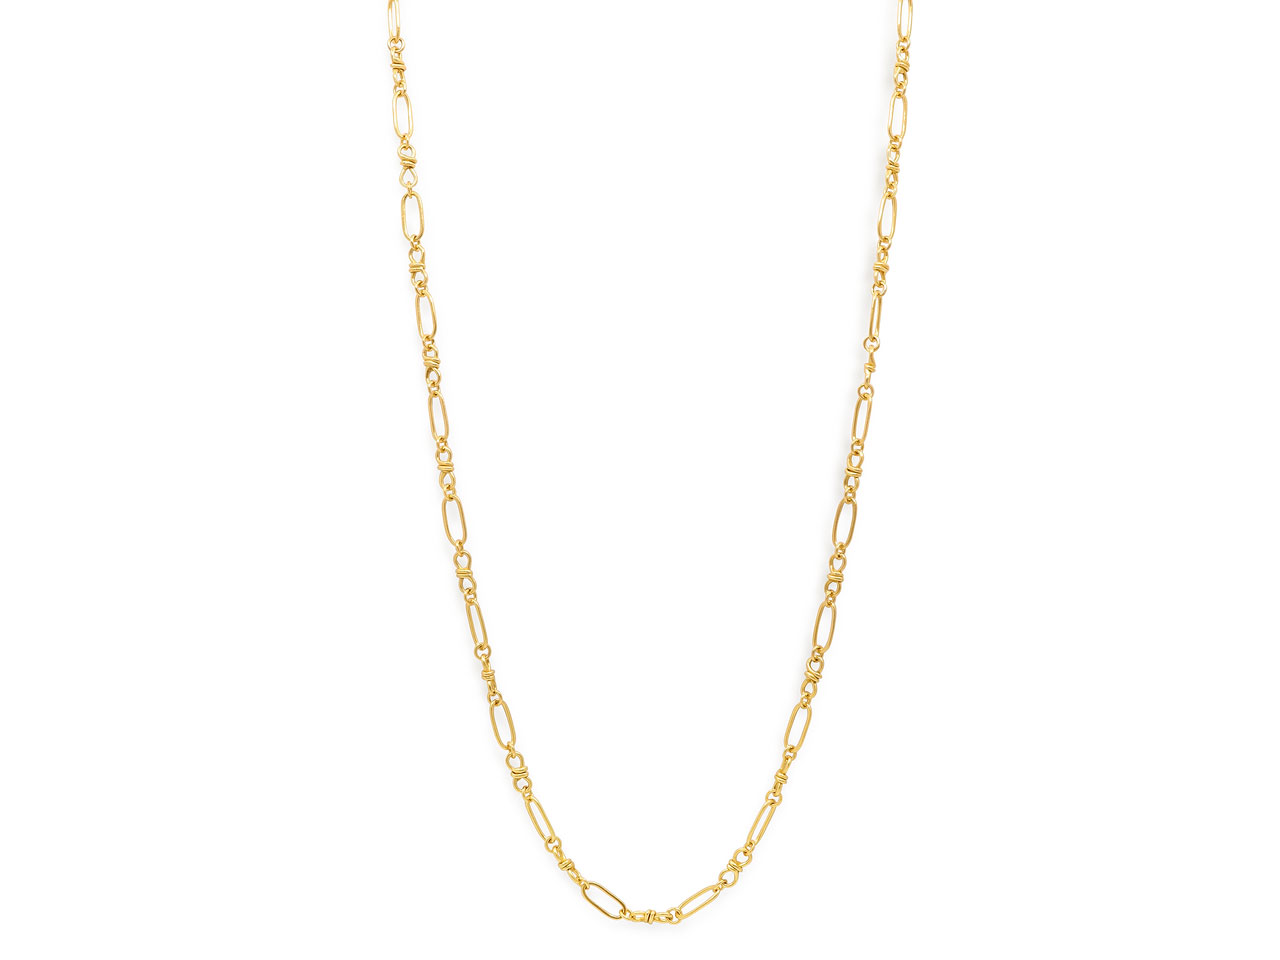 Denise Roberge Chain in 18K Gold